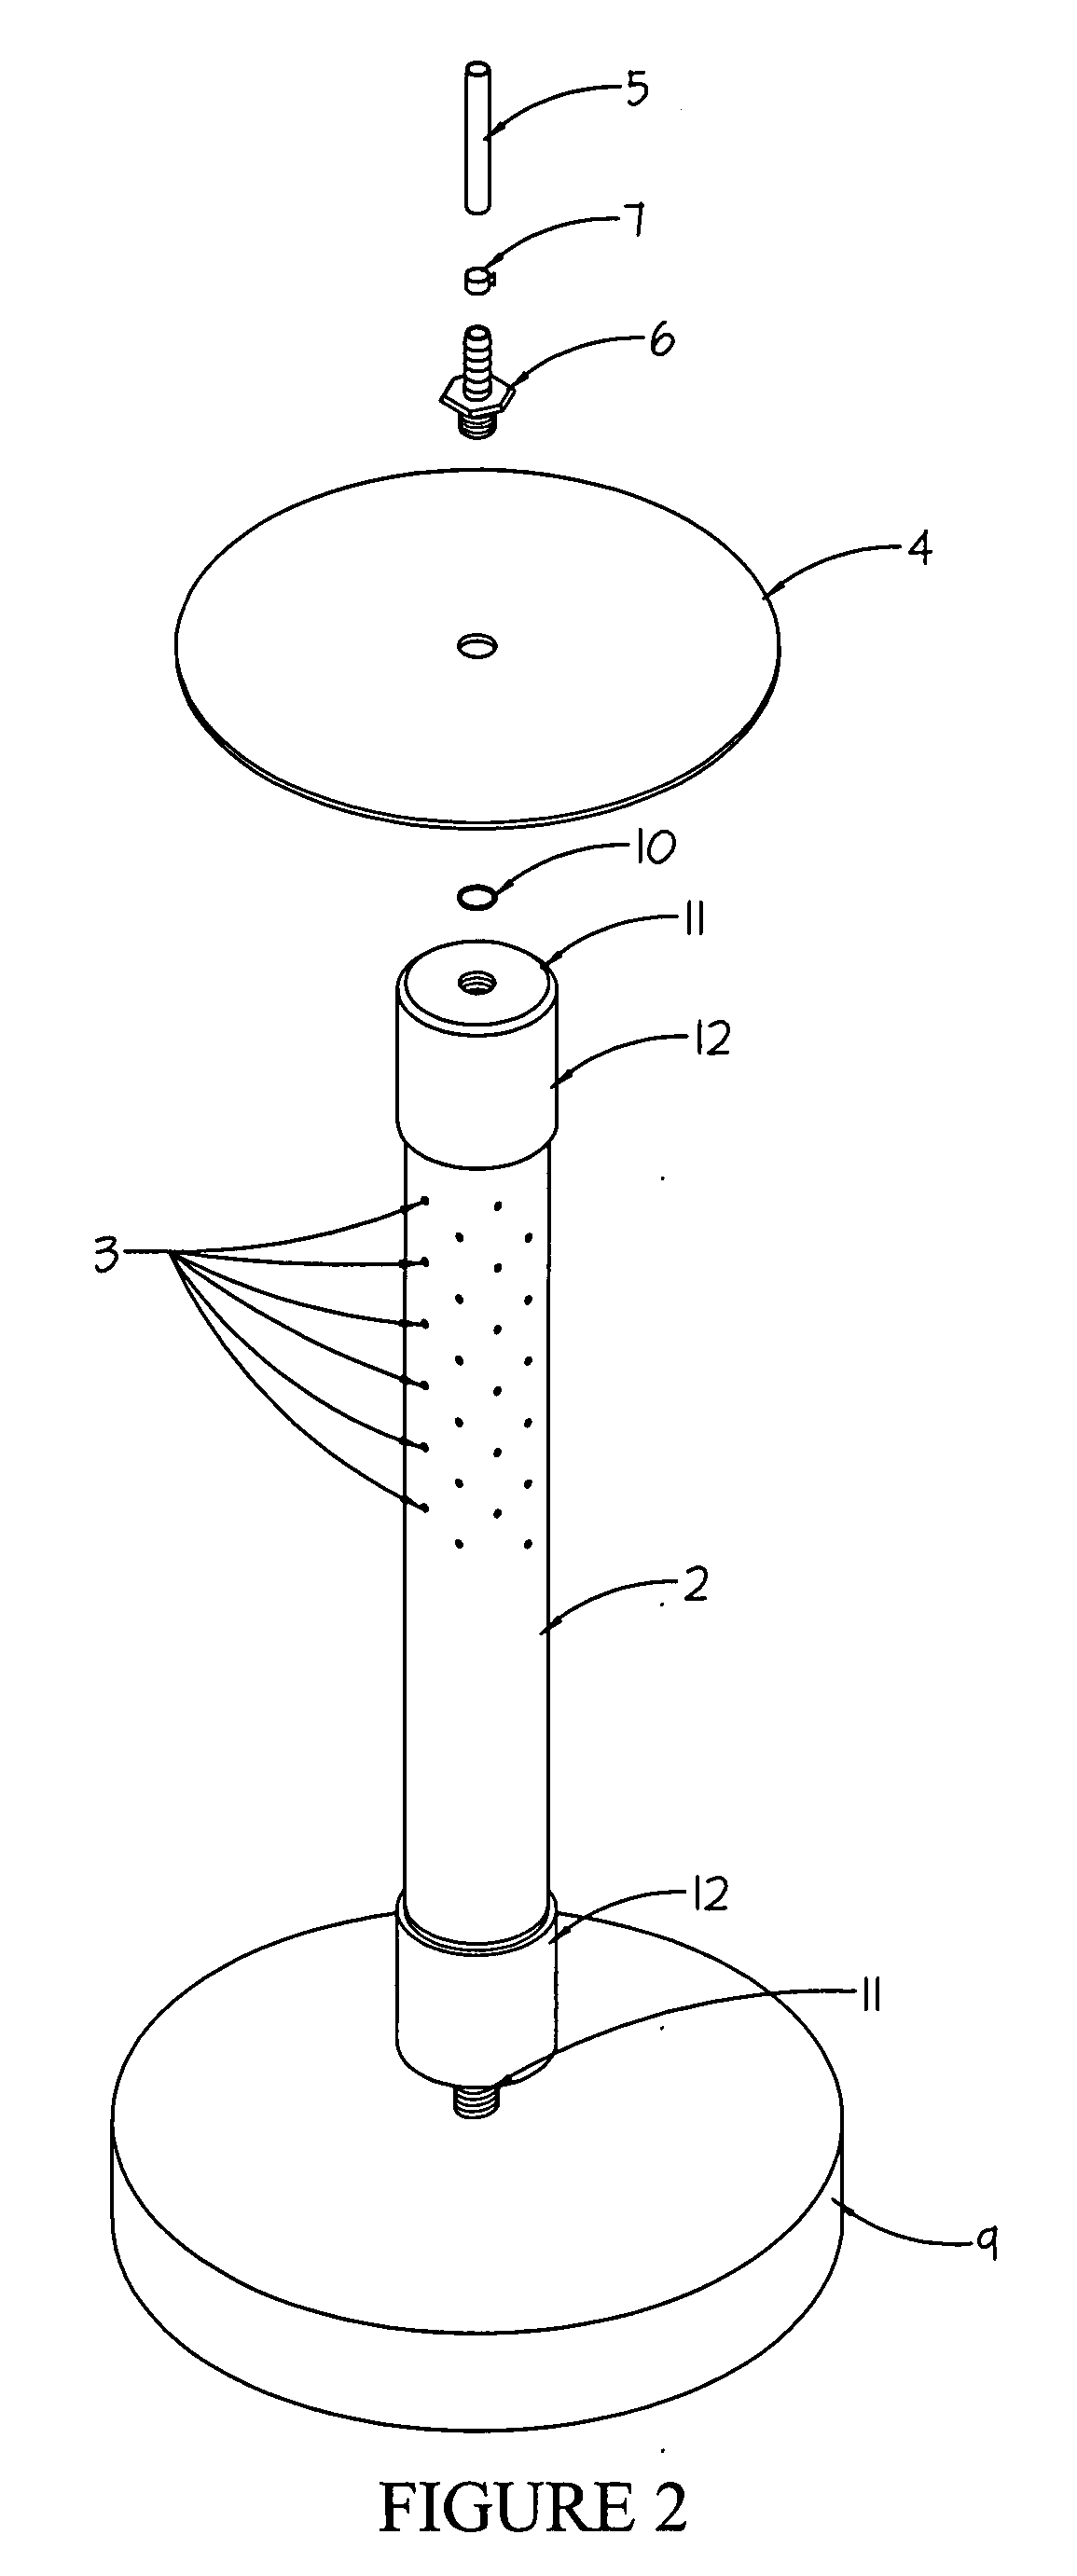 Self-standing weighted diffuser assembly